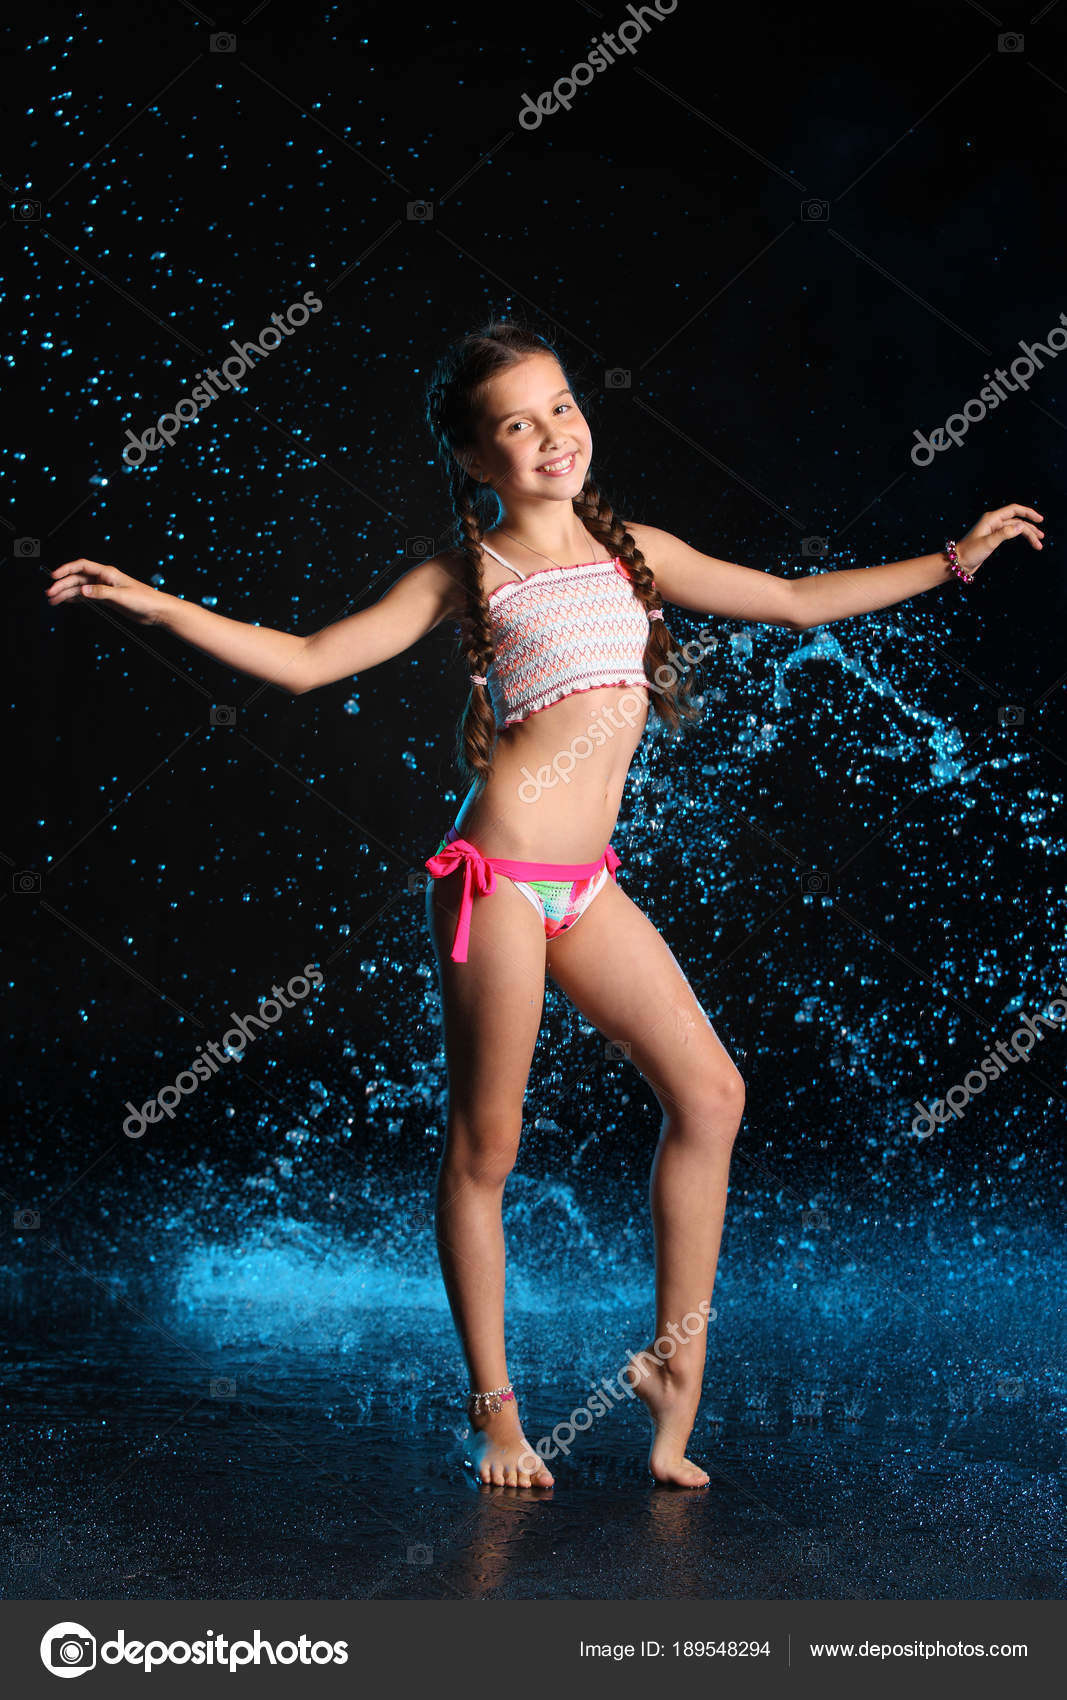 9,550 Swimsuit Teen Girl Images, Stock Photos, 3D objects, & Vectors